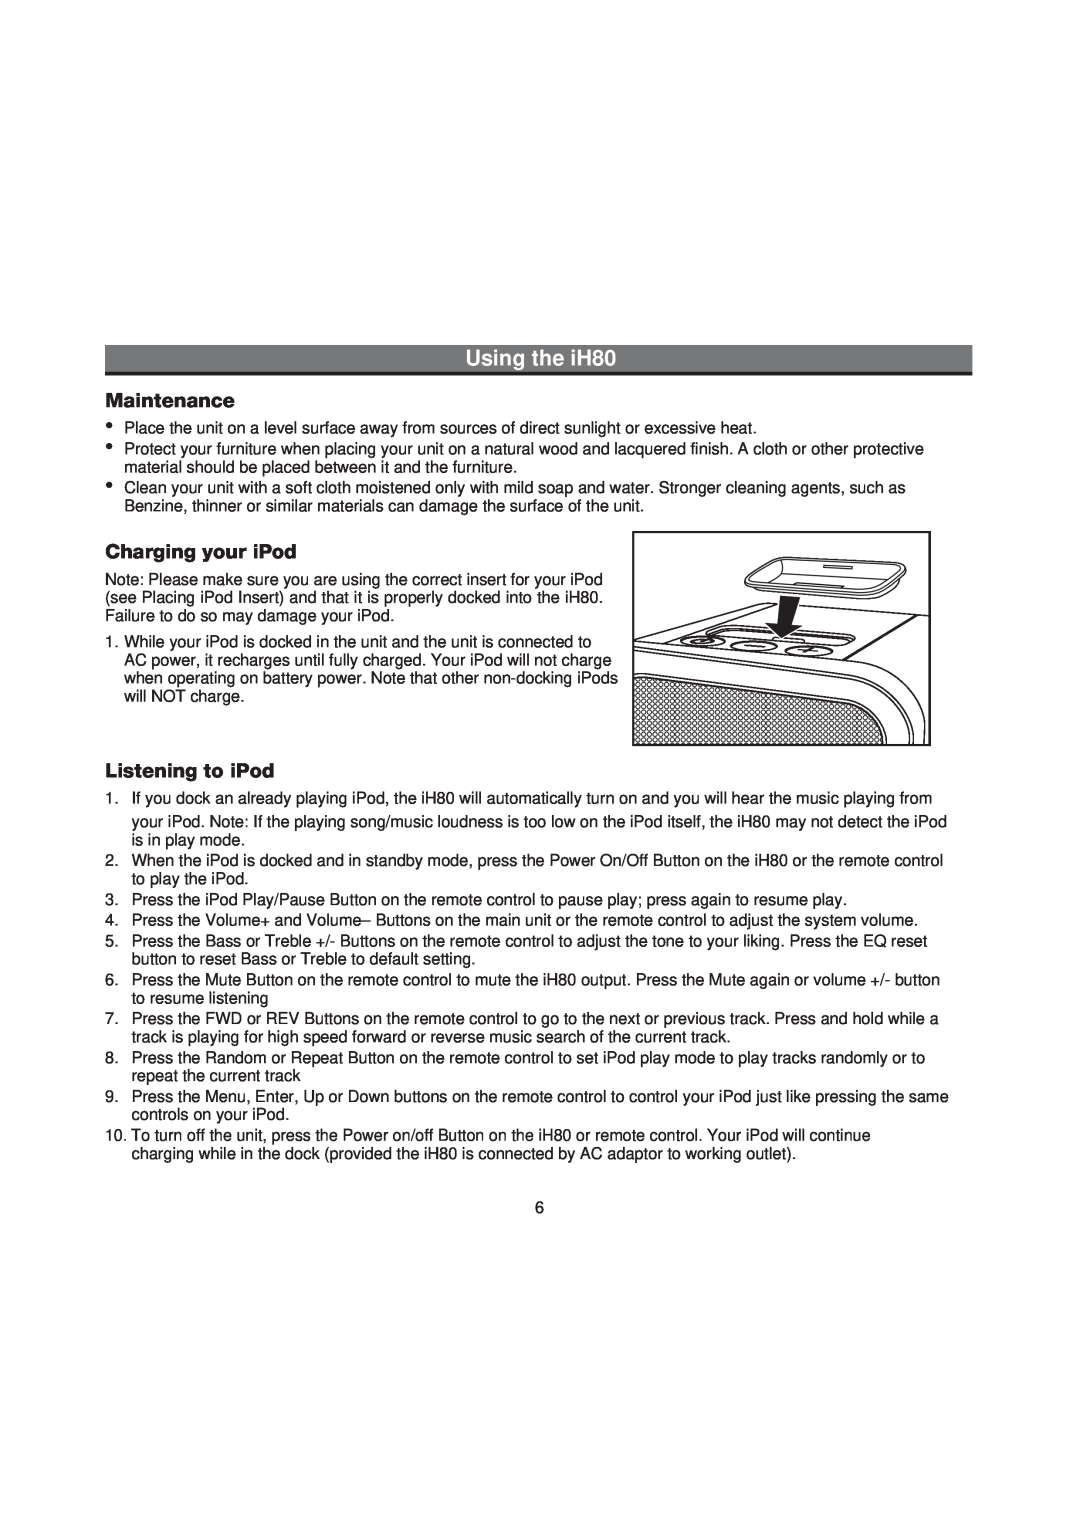 iHome manual Using the iH80, Maintenance, Charging your iPod, Listening to iPod 